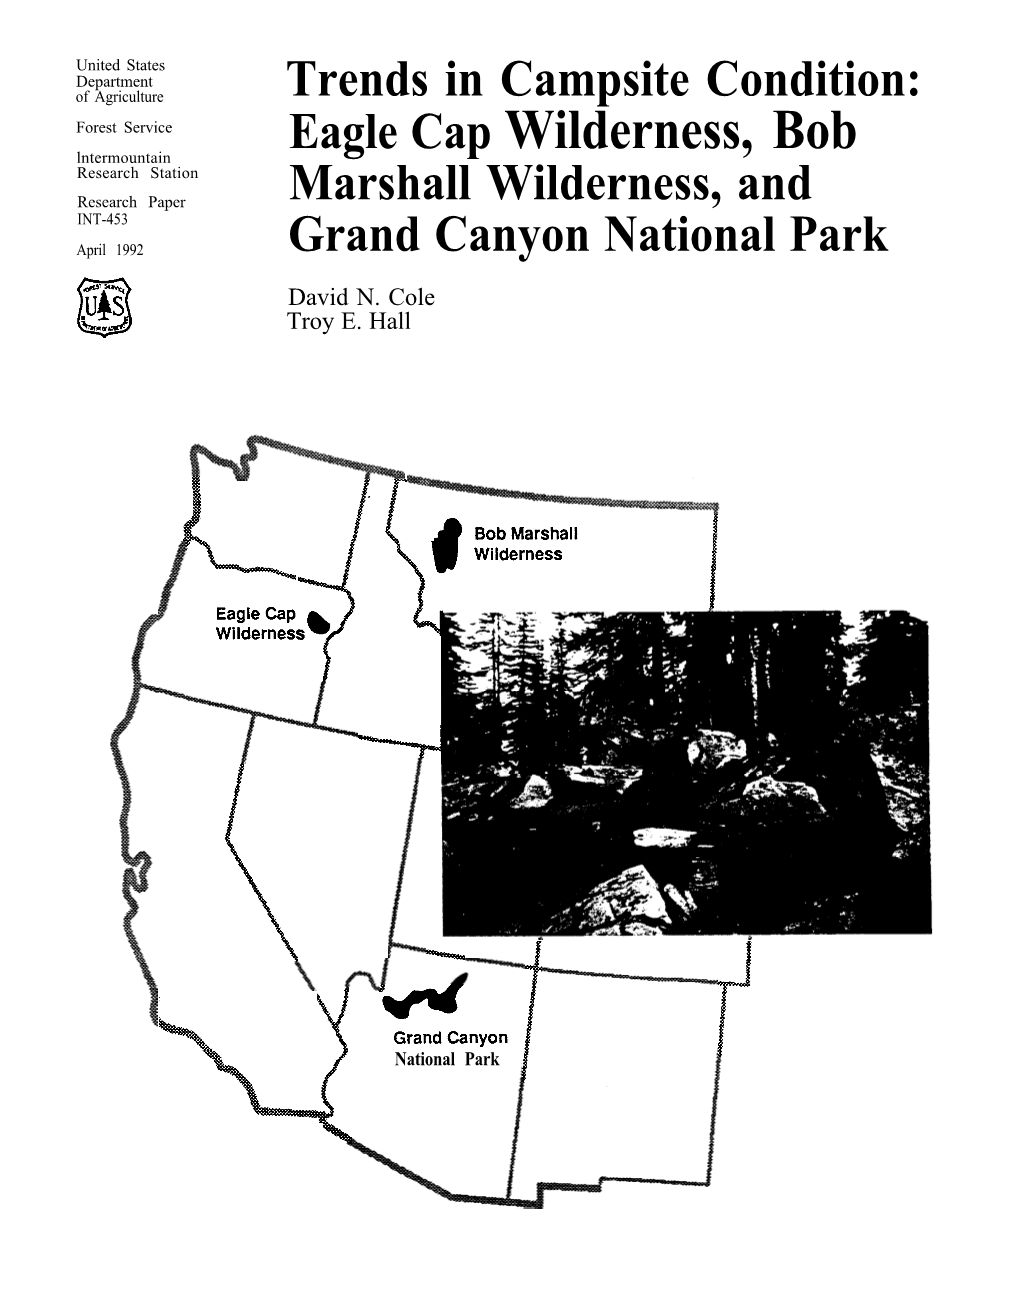 Eagle Cap Wilderness, Bob Marshall Wilderness, and Grand Canyon National Park